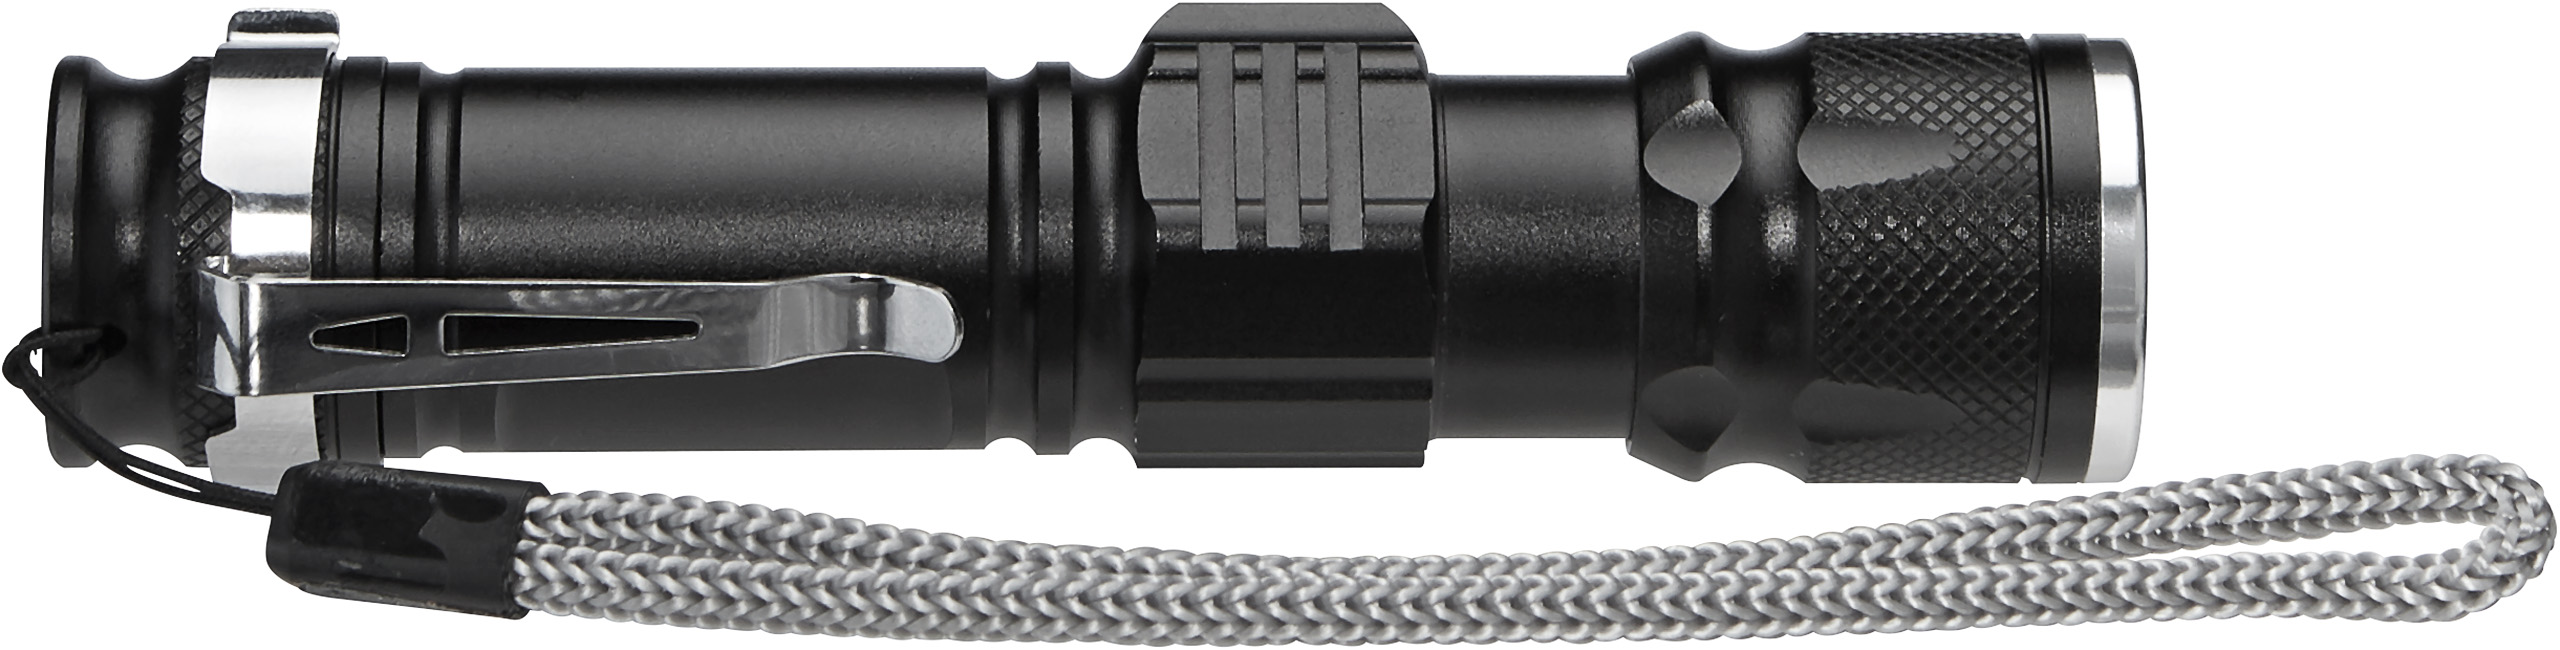 Flashlight rechargeable via cable